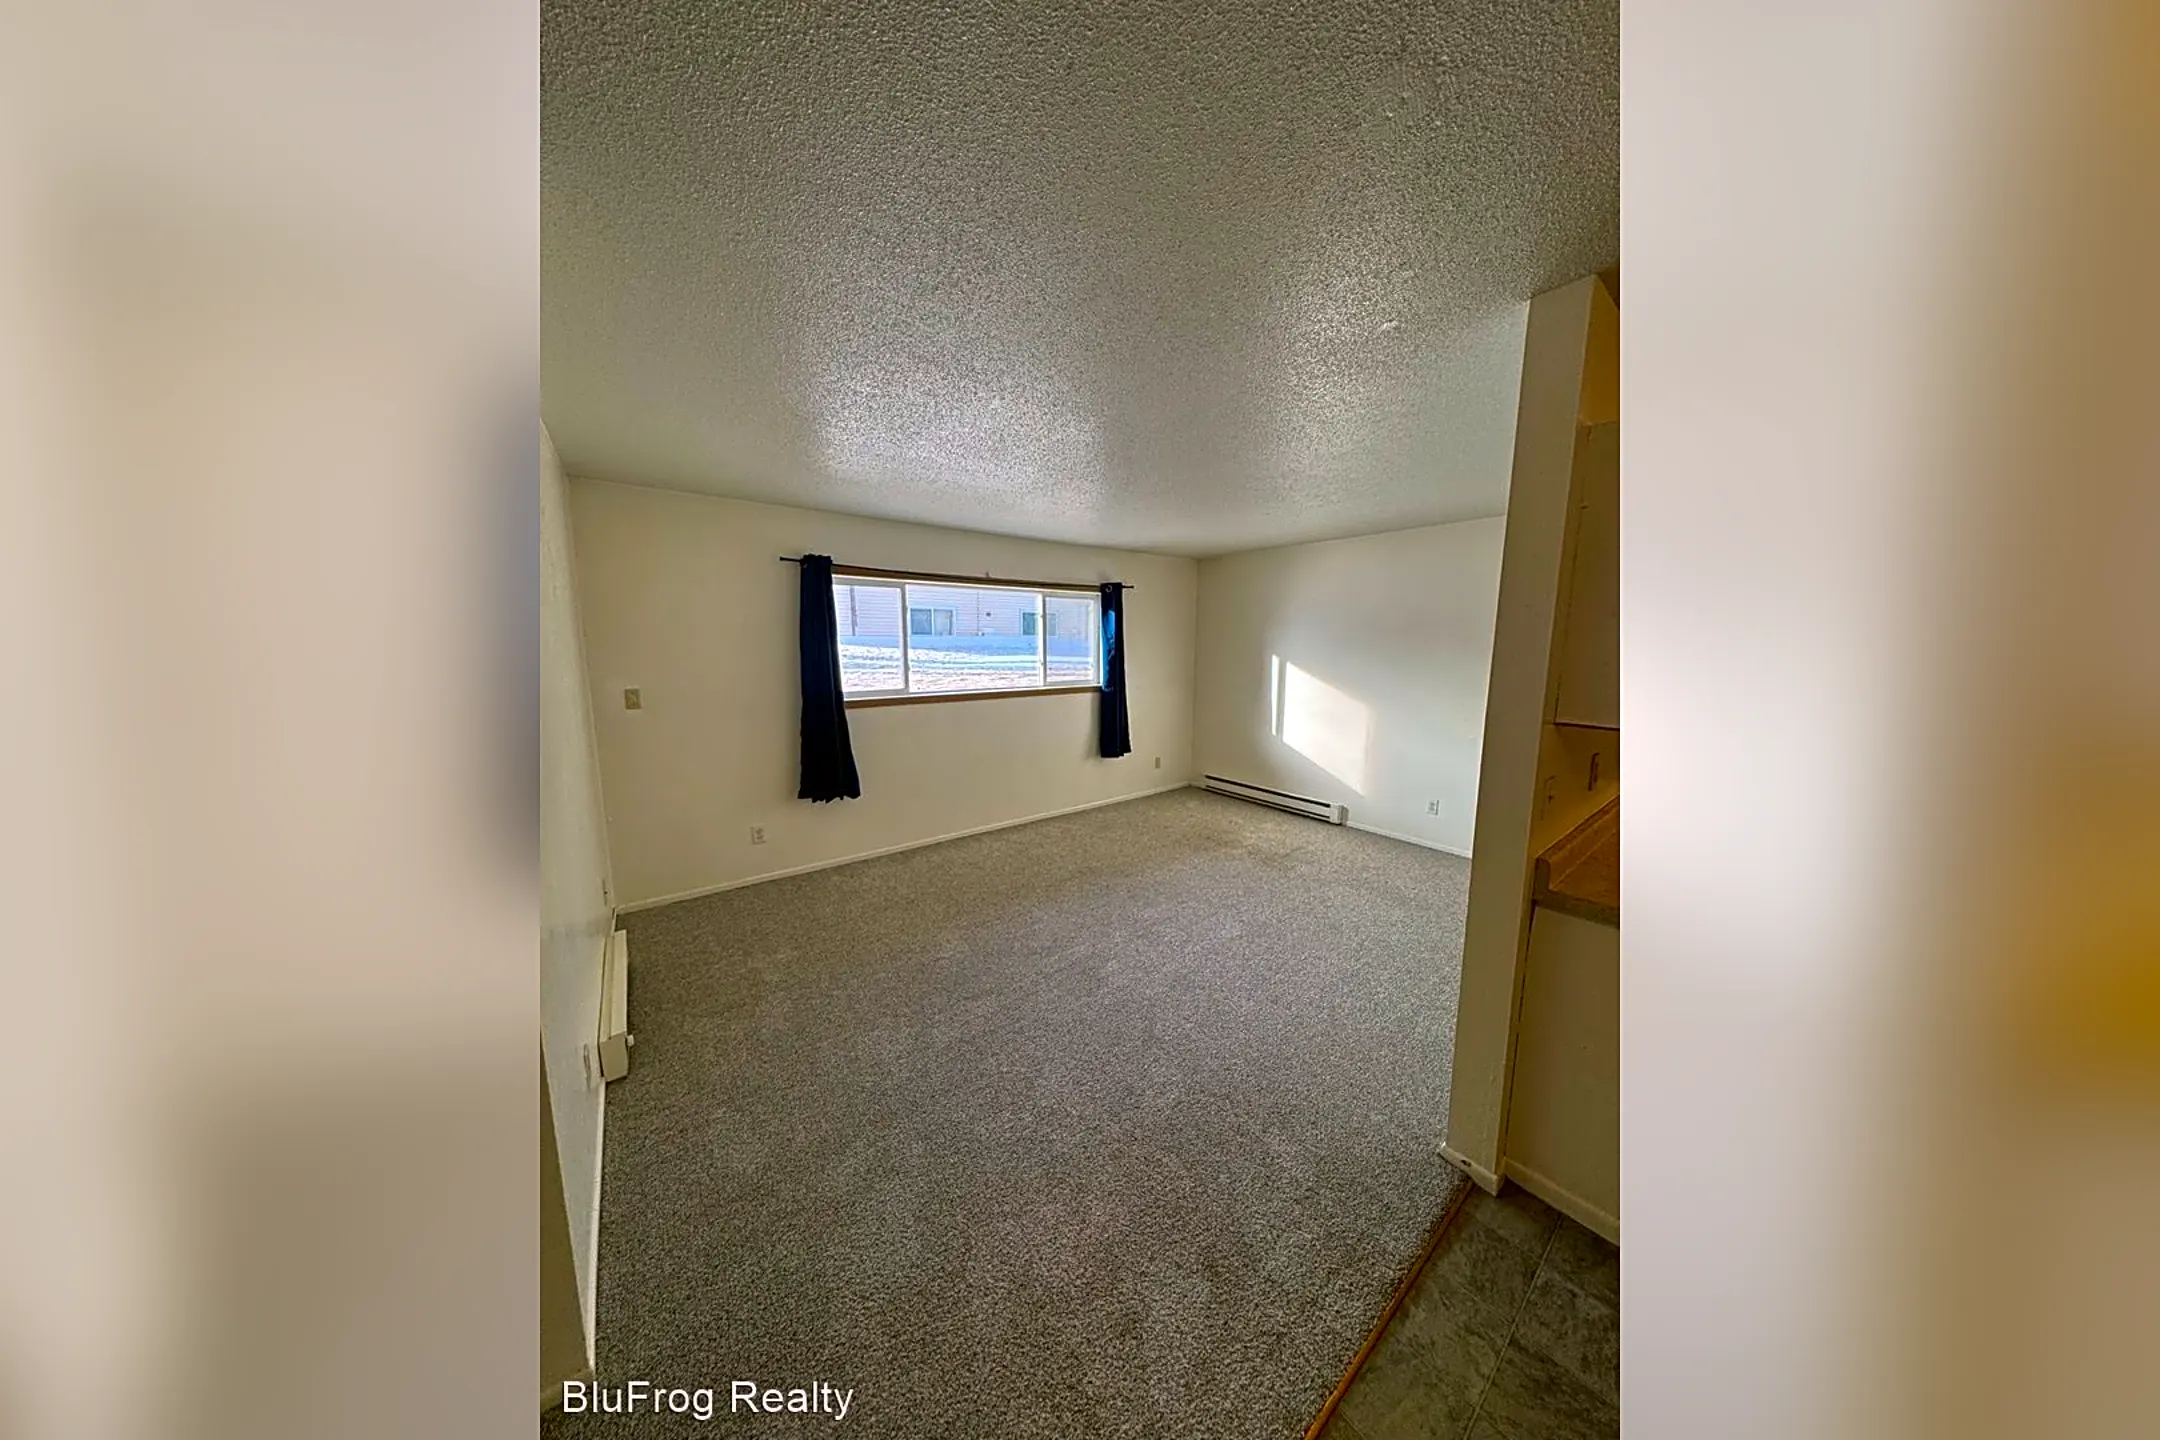 Living Room - 1604 16th Ave SW - Jamestown, ND